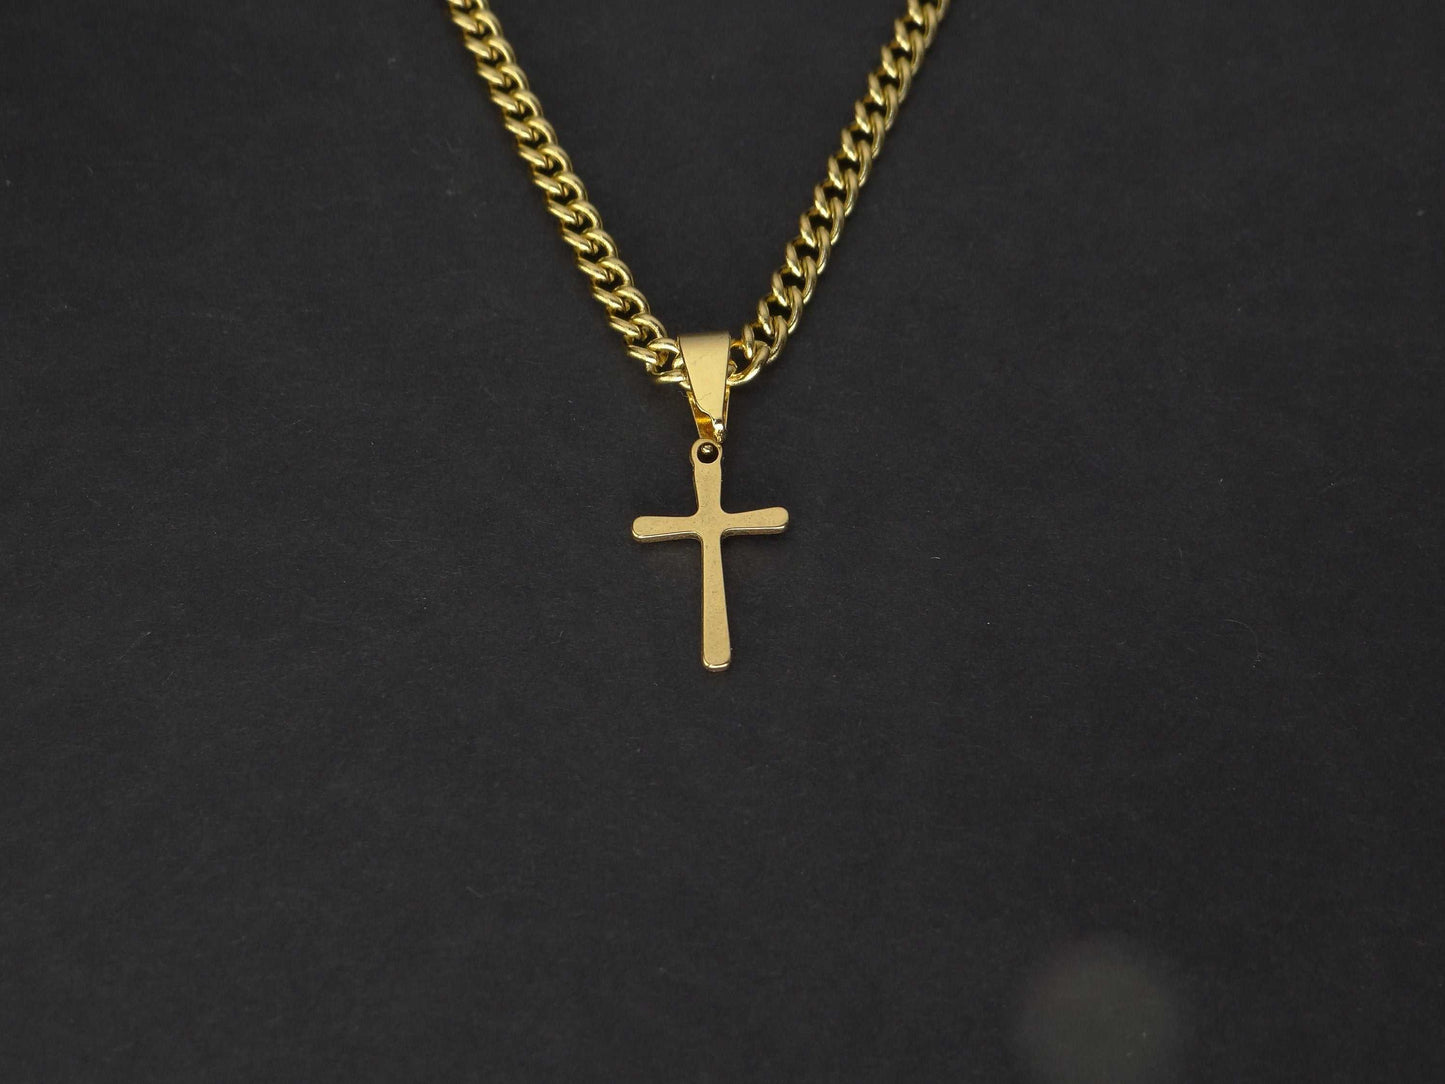 CRW Tiny Cross Necklace with 1.8mm curb link chain in gold - Religious Necklace for Women - Jesus Necklace for Men - Necklace with Pendant